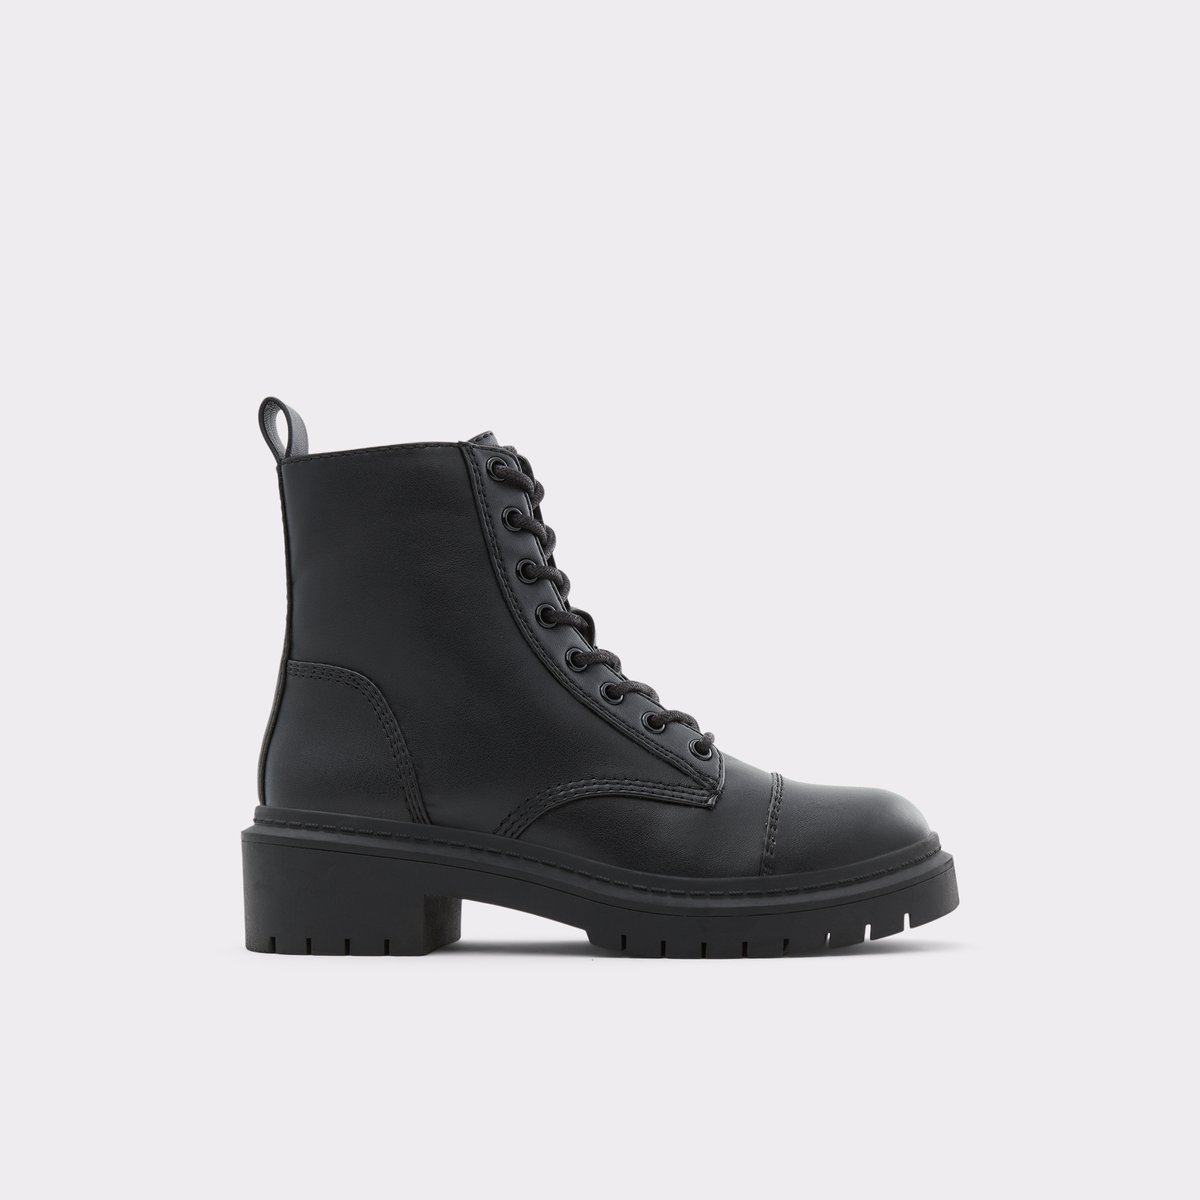 Goer Black Synthetic Smooth Women's Casual boots | ALDO Canada